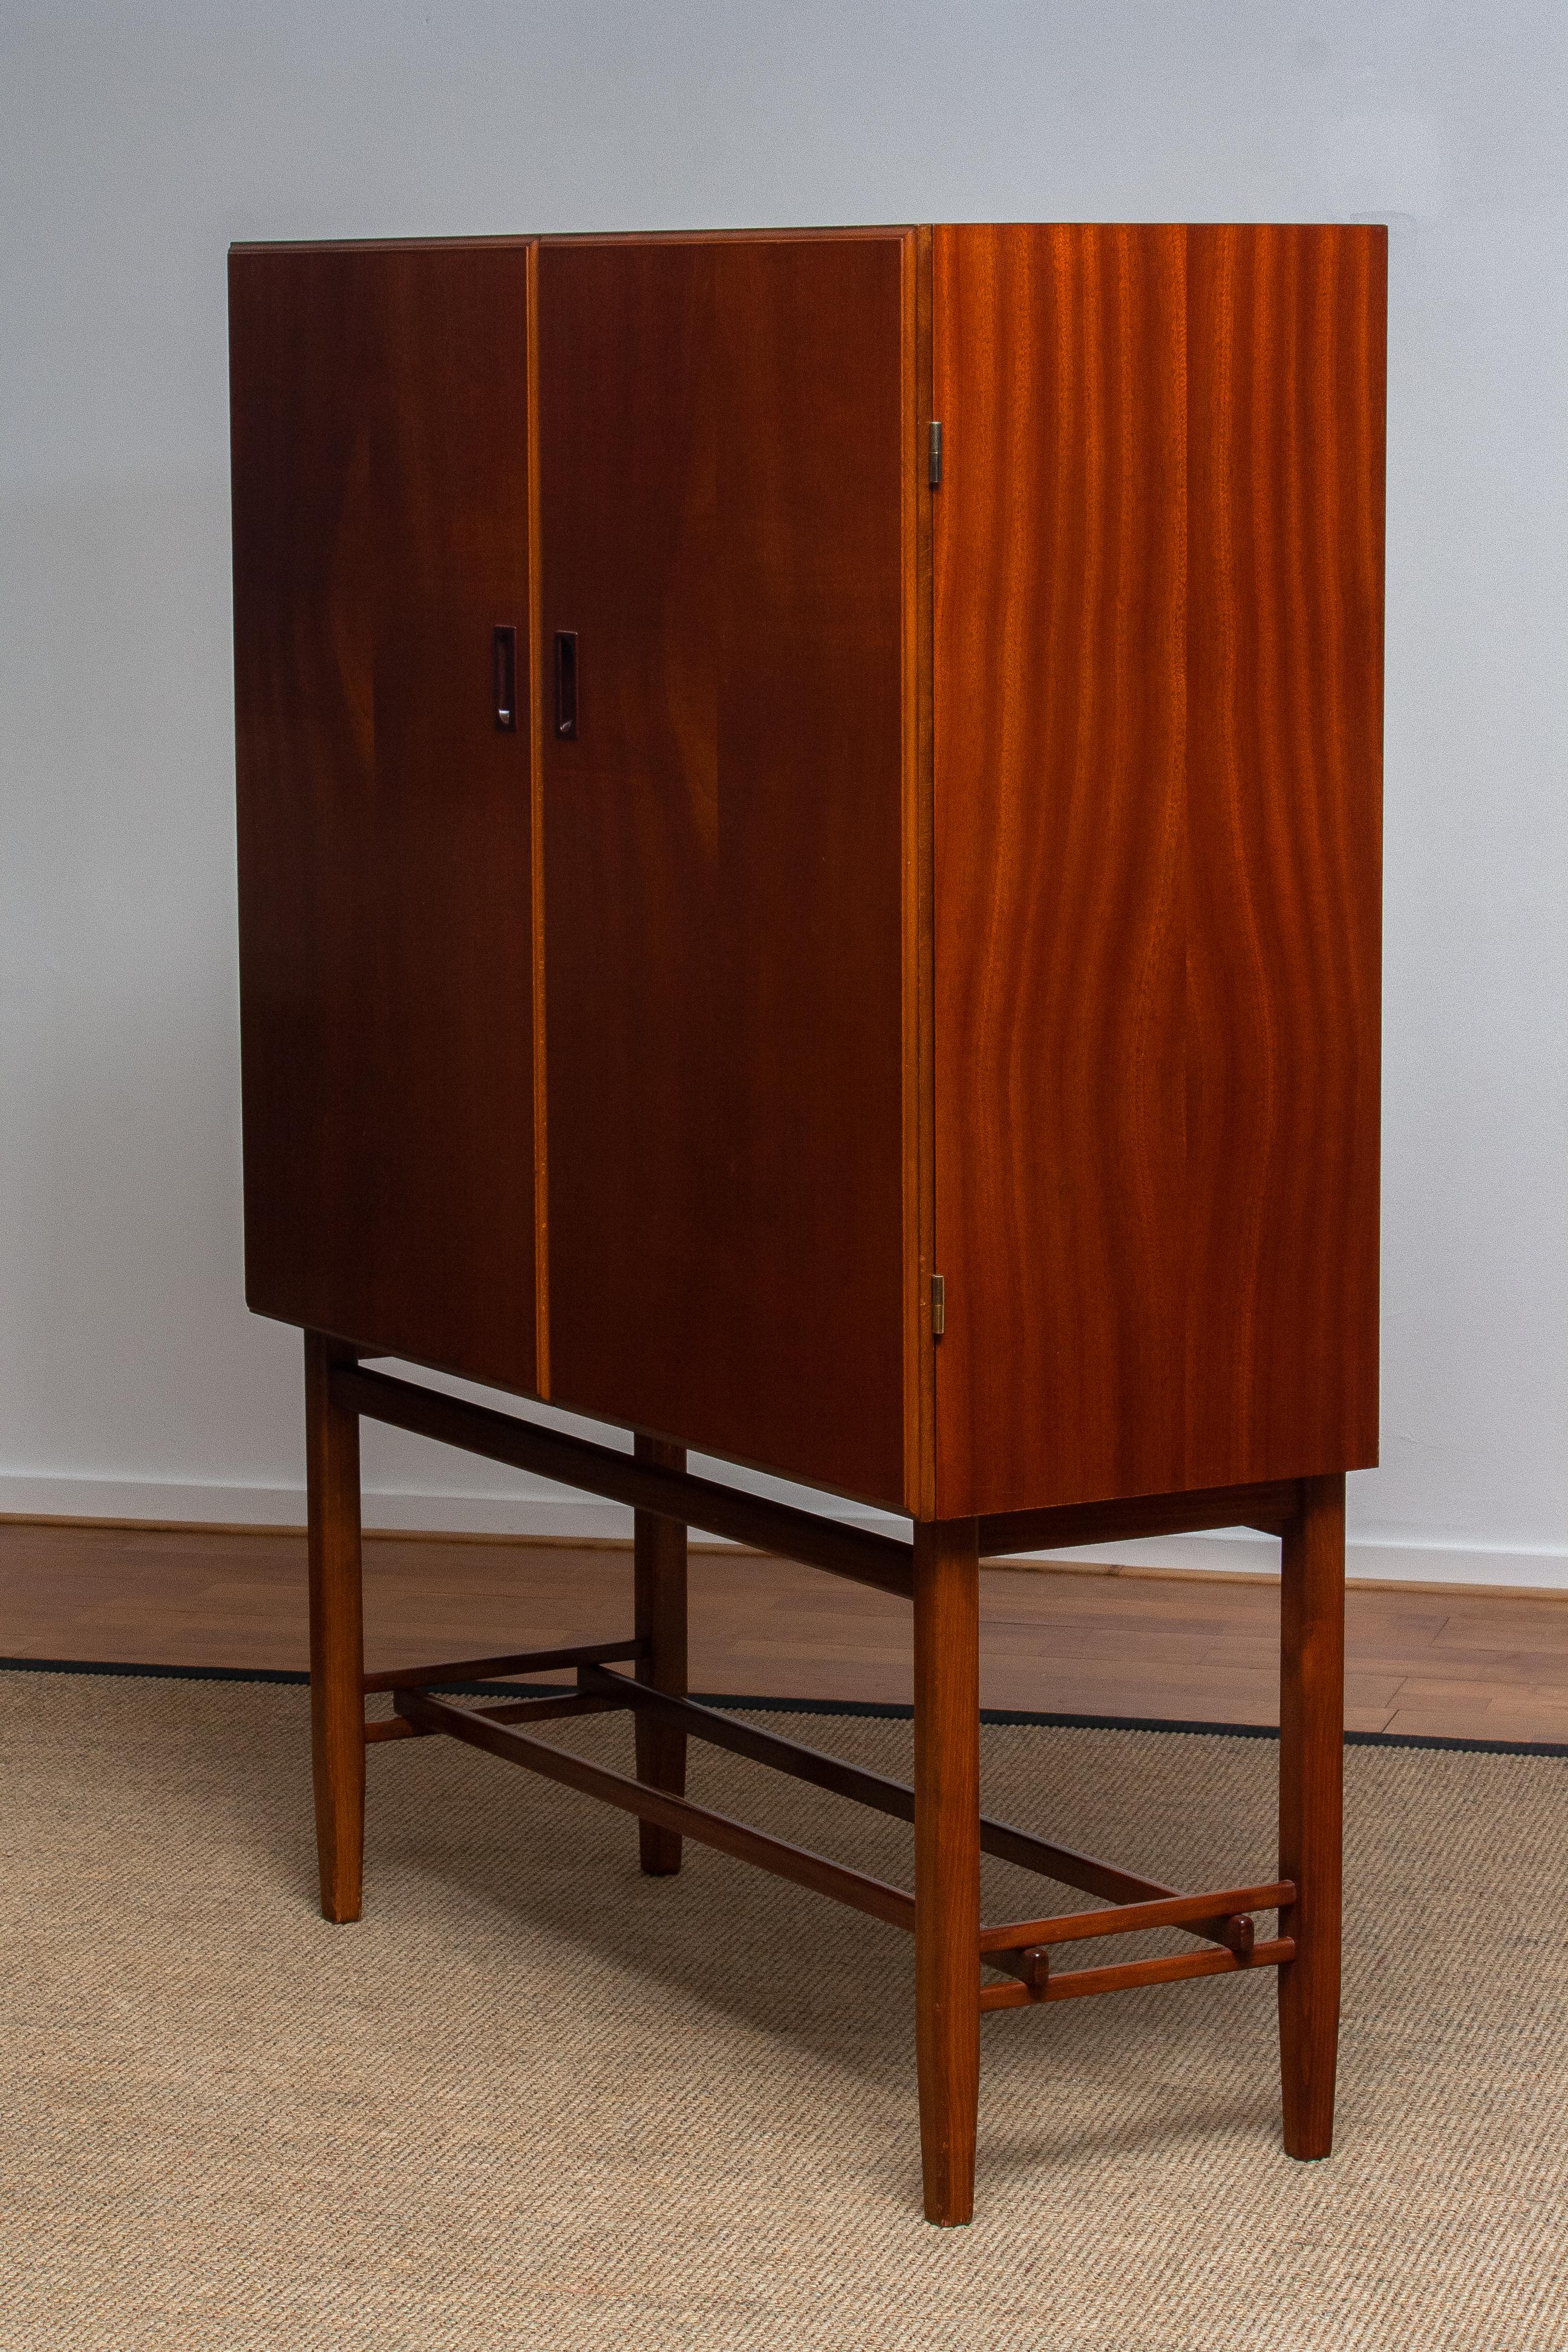 Mid-Century Modern 1950s, Slim Midcentury Mahogany Dry Bar or Cabinet by Forenades Mobler, Sweden